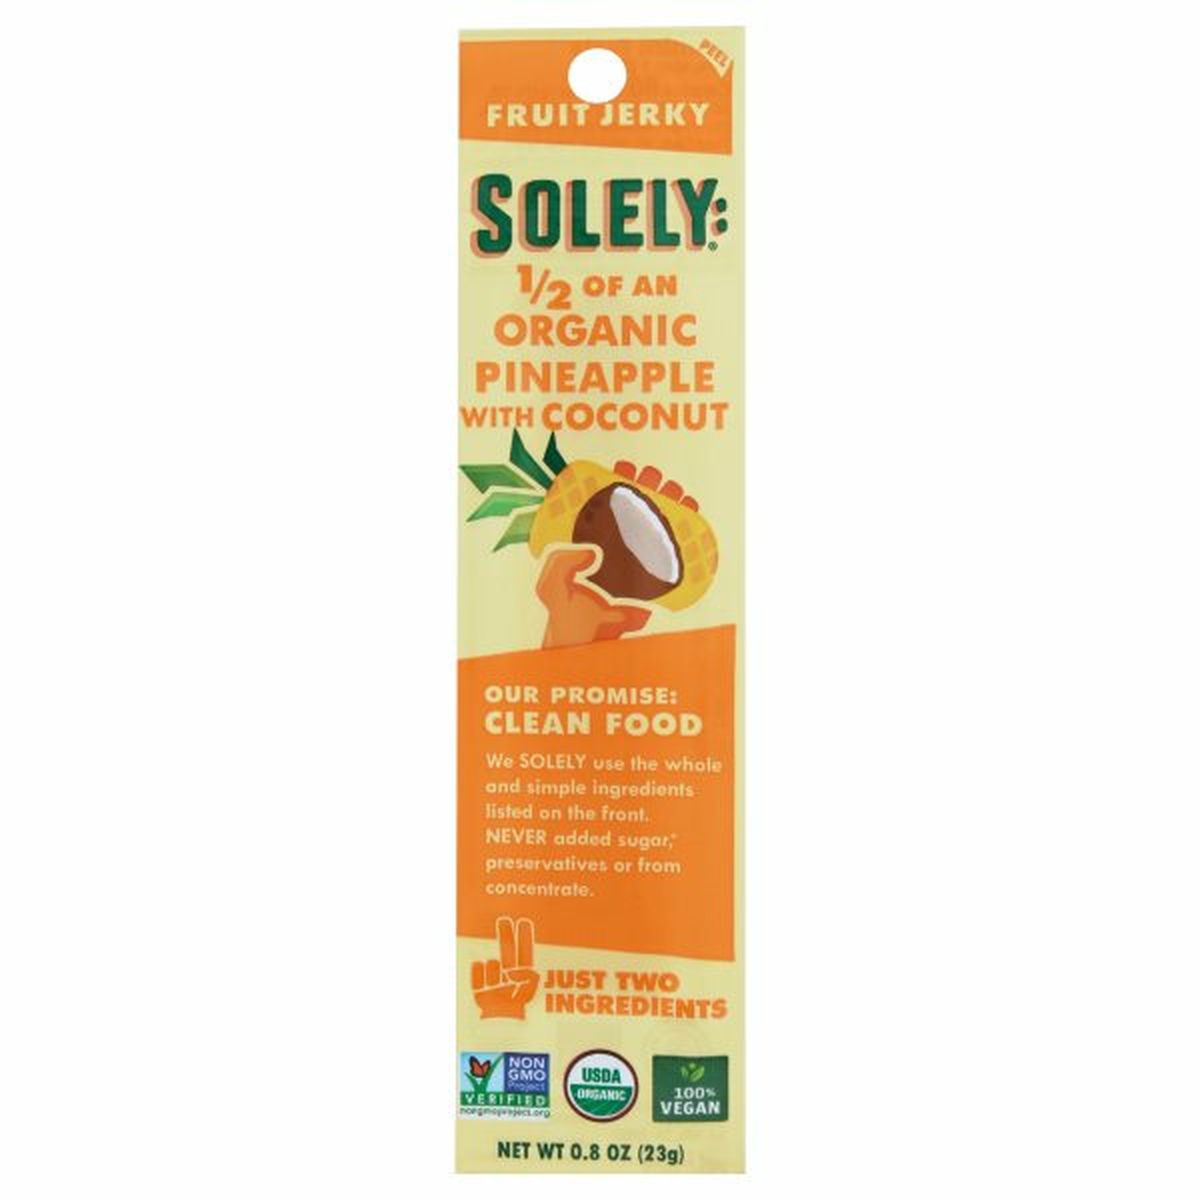 Calories in Solely Fruit Jerky, Organic, Pineapple with Coconut